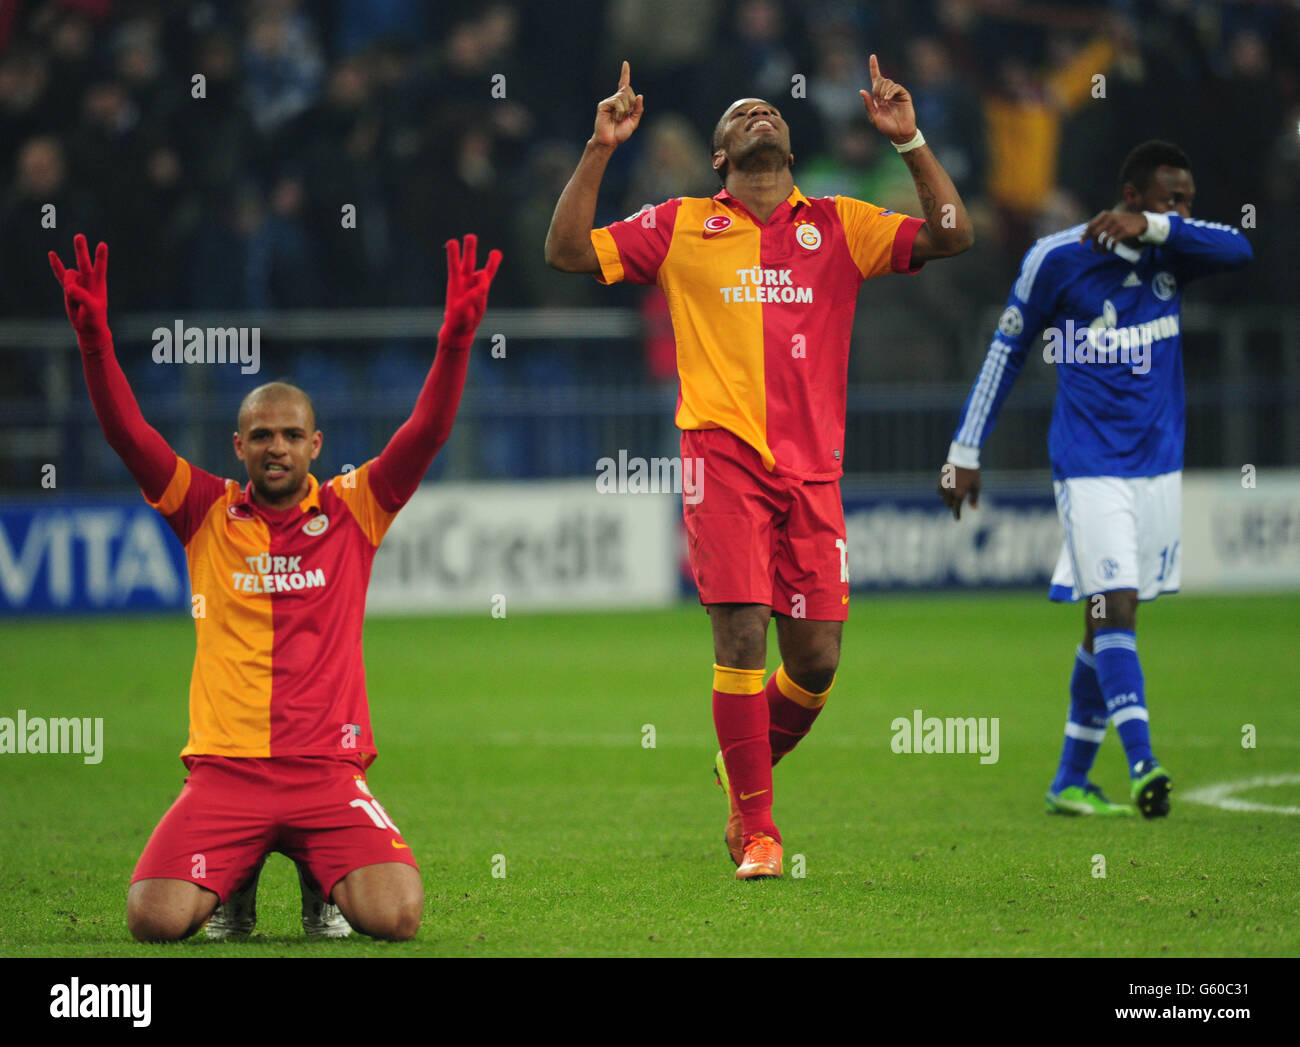 Galatasaray's Didier Drogba (centre) and Felipe Melo (left) celebrate at the end of the game as Schale 04 Michel Bastos stands dejected Stock Photo